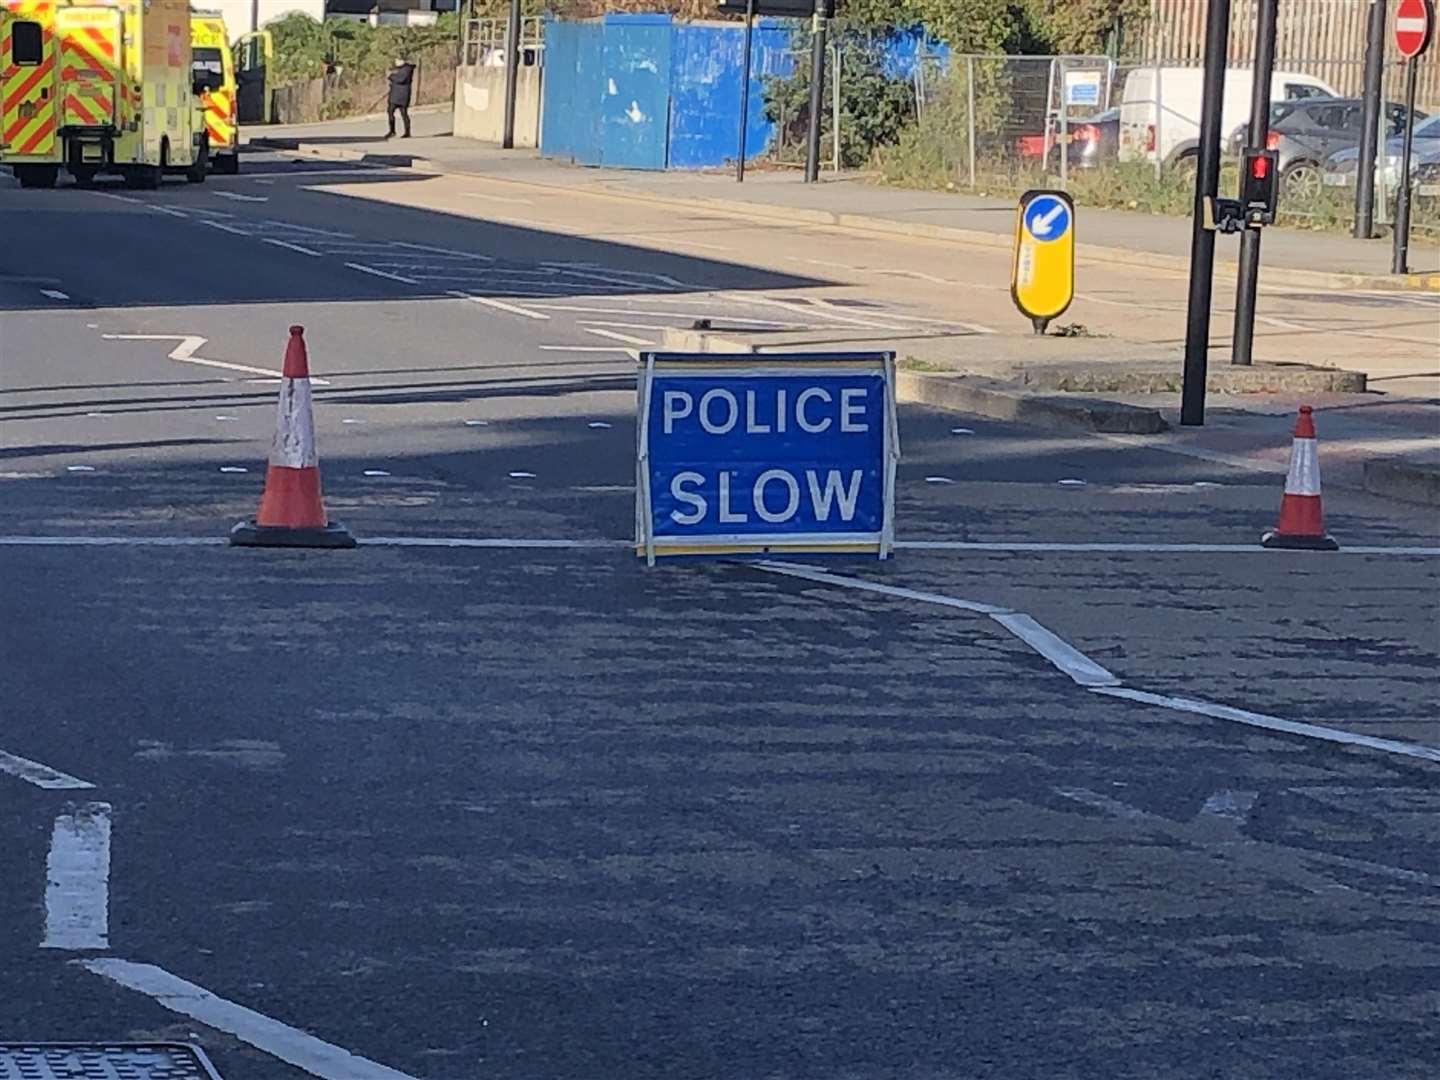 Police have closed the road